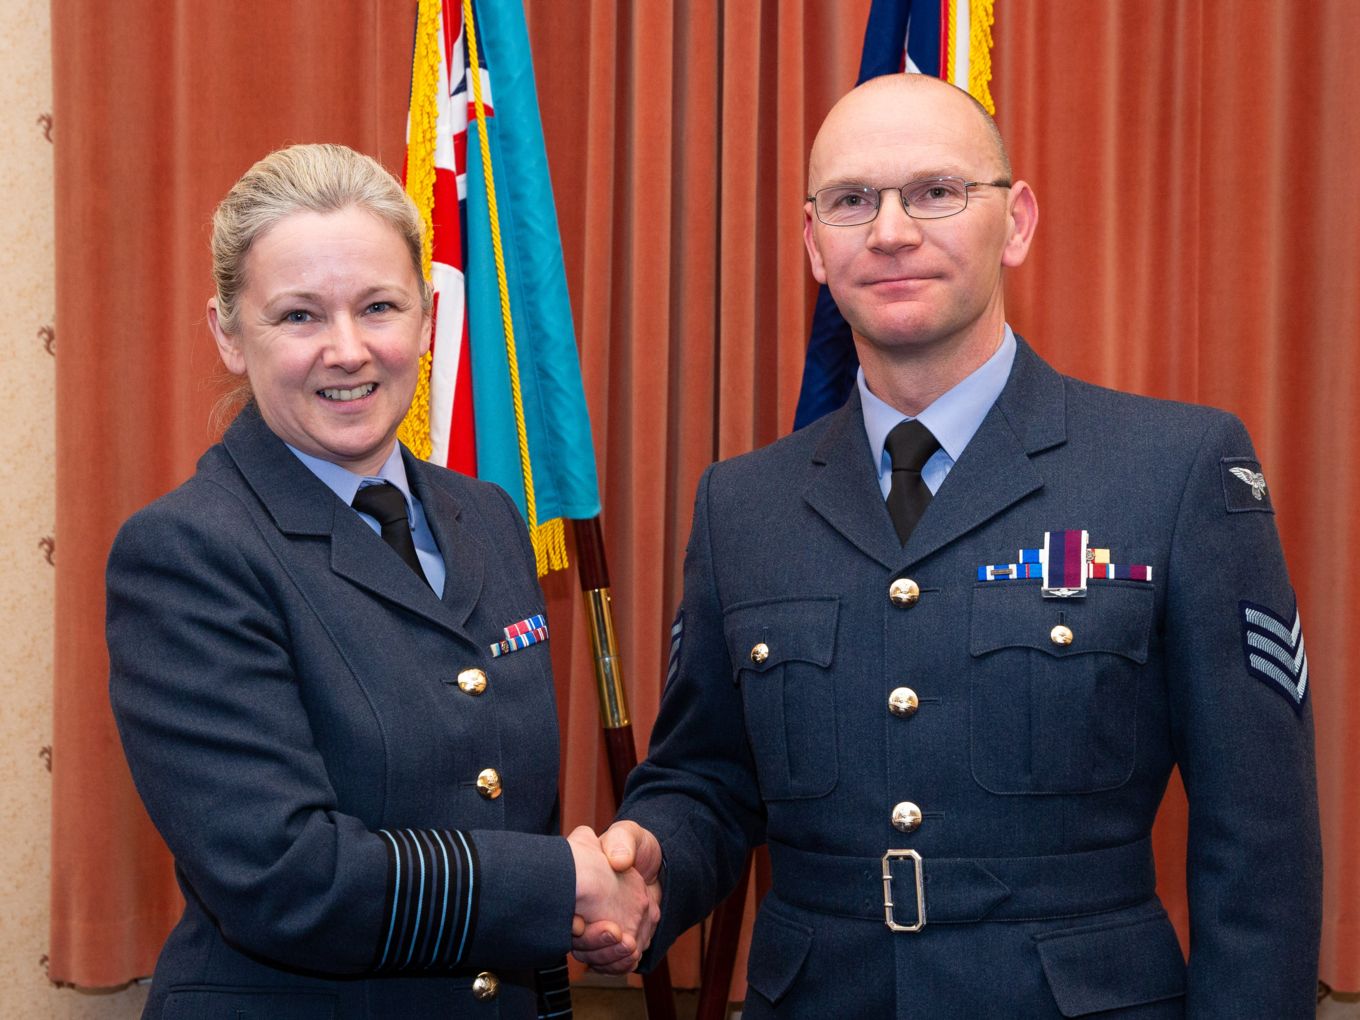 Sergeant Steve Harland and Group Captain Jo Lincoln at the presentation of his awards